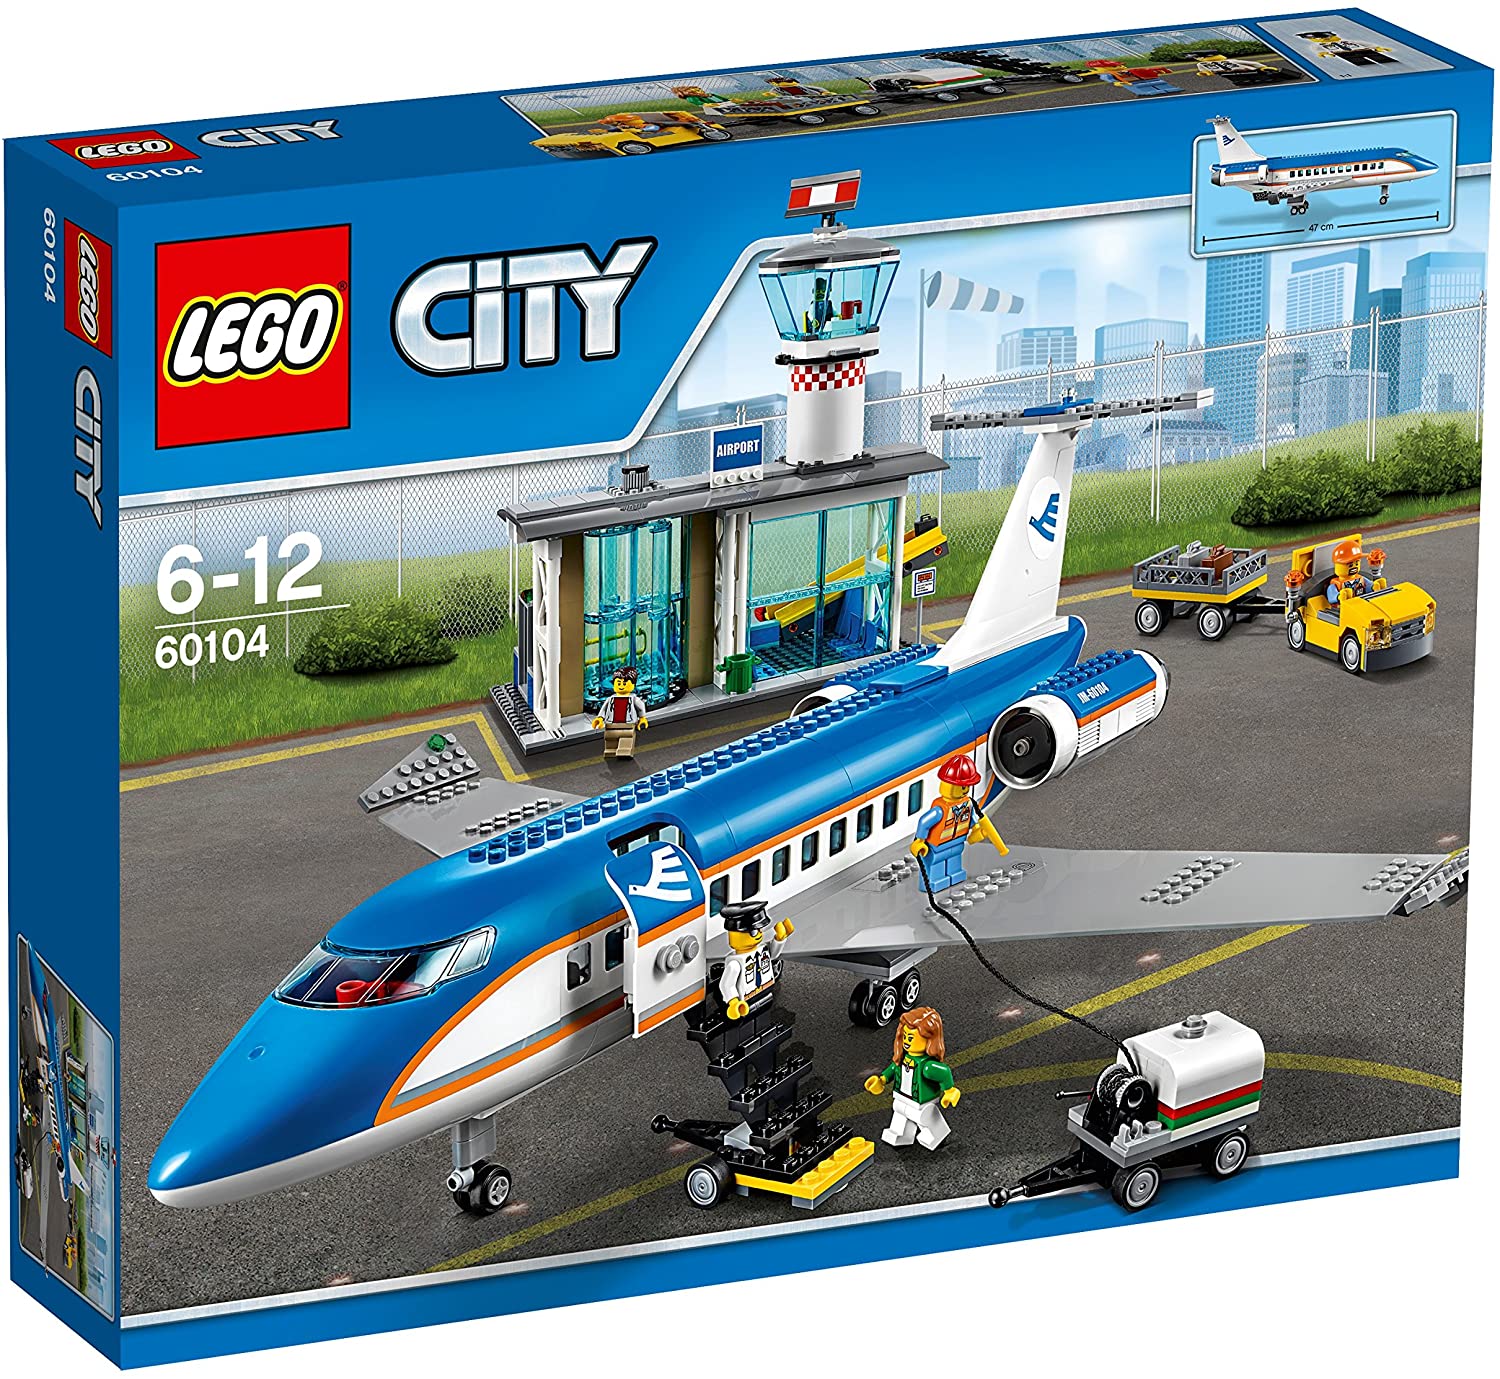 Lego City 60104 - Airport Checkout Hall - Creative Toy